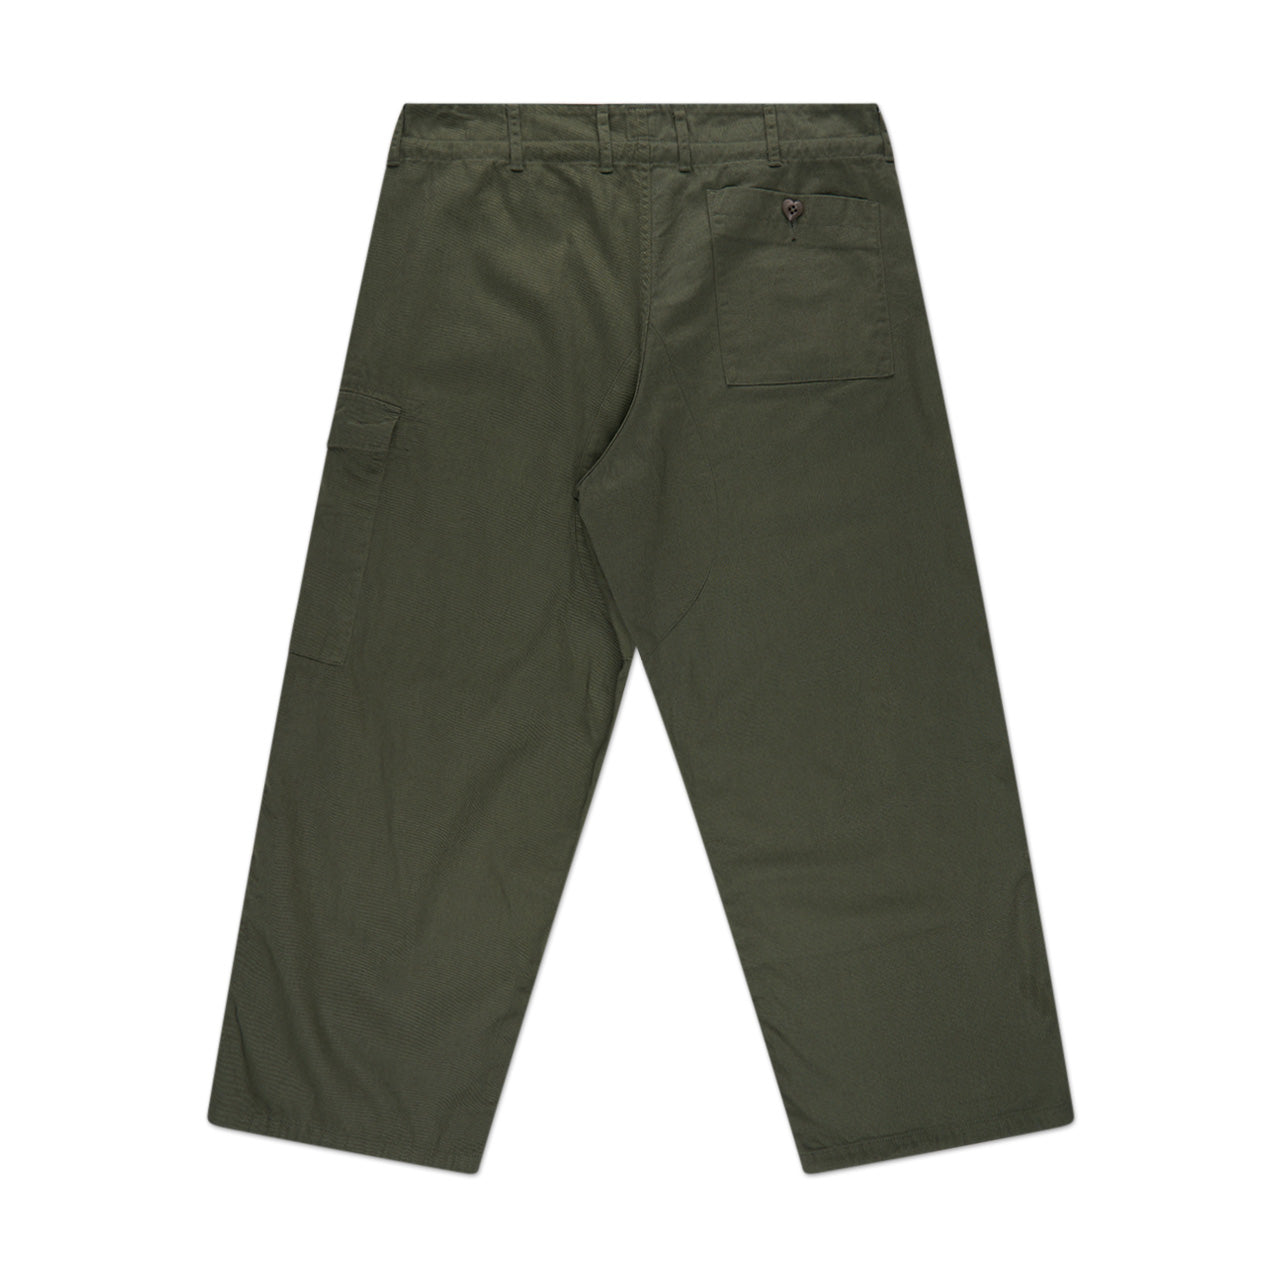 Easy pants military. Sweatpants like and rugged military look